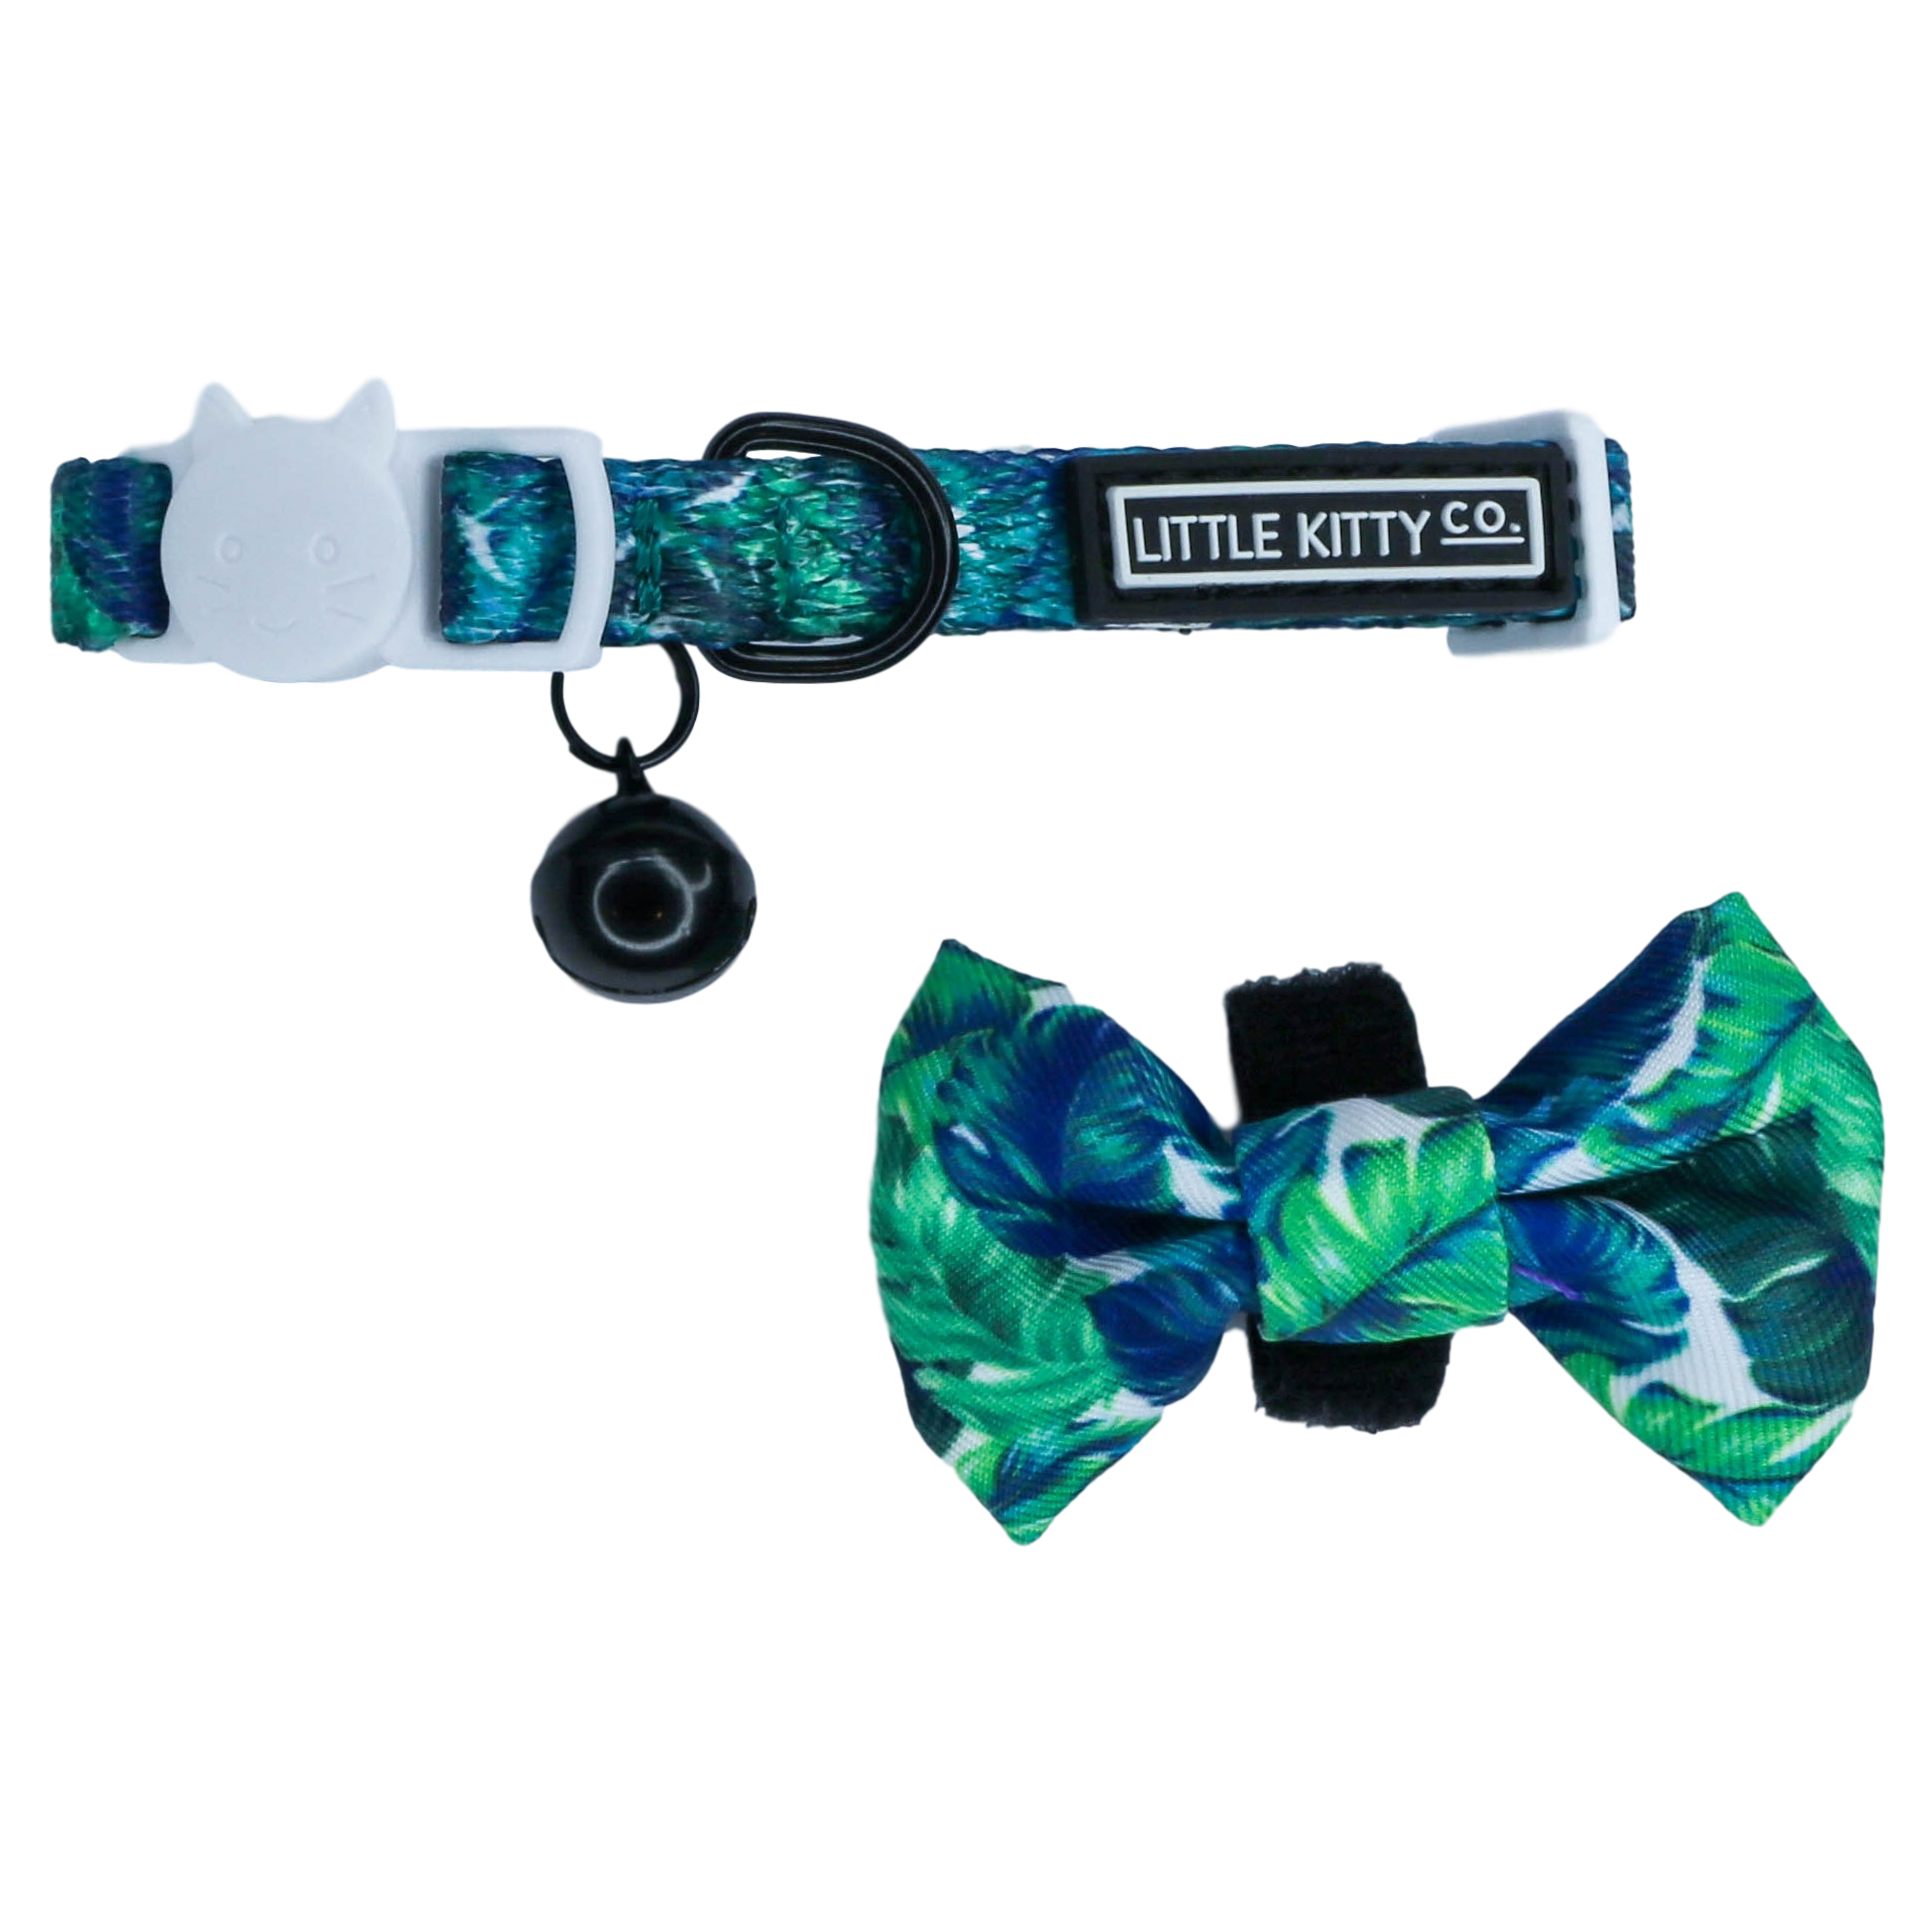 Cat Collar and Bow Tie Vacay Palms